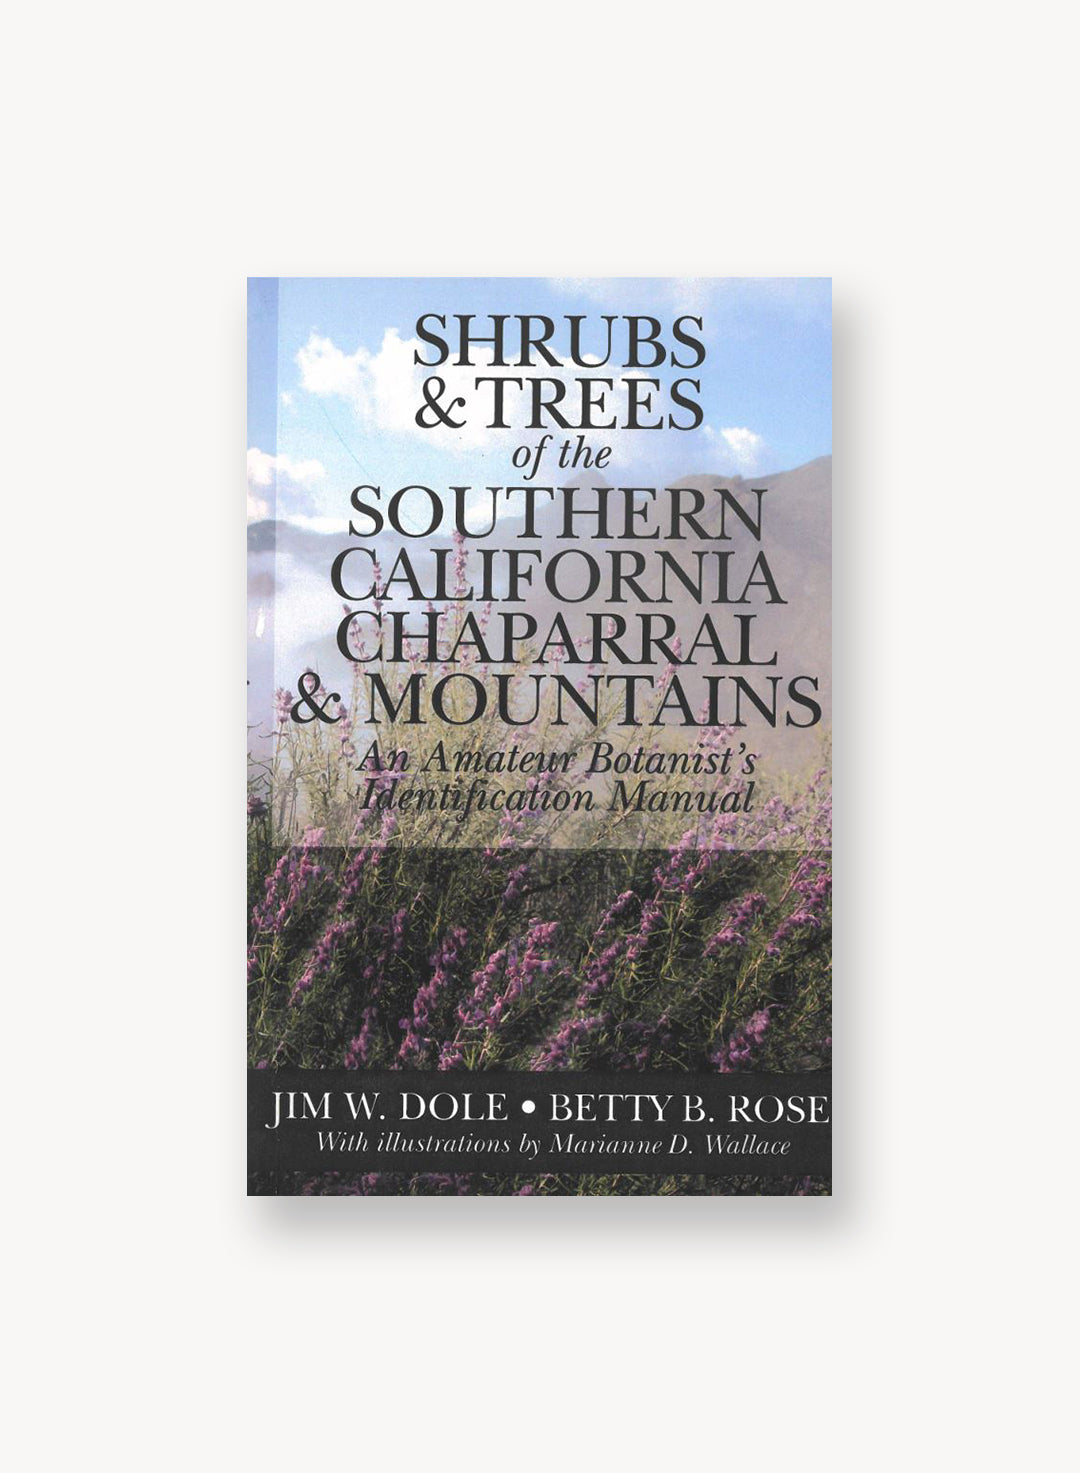 Shrubs & Trees of the Southern California Chaparral & Mountains